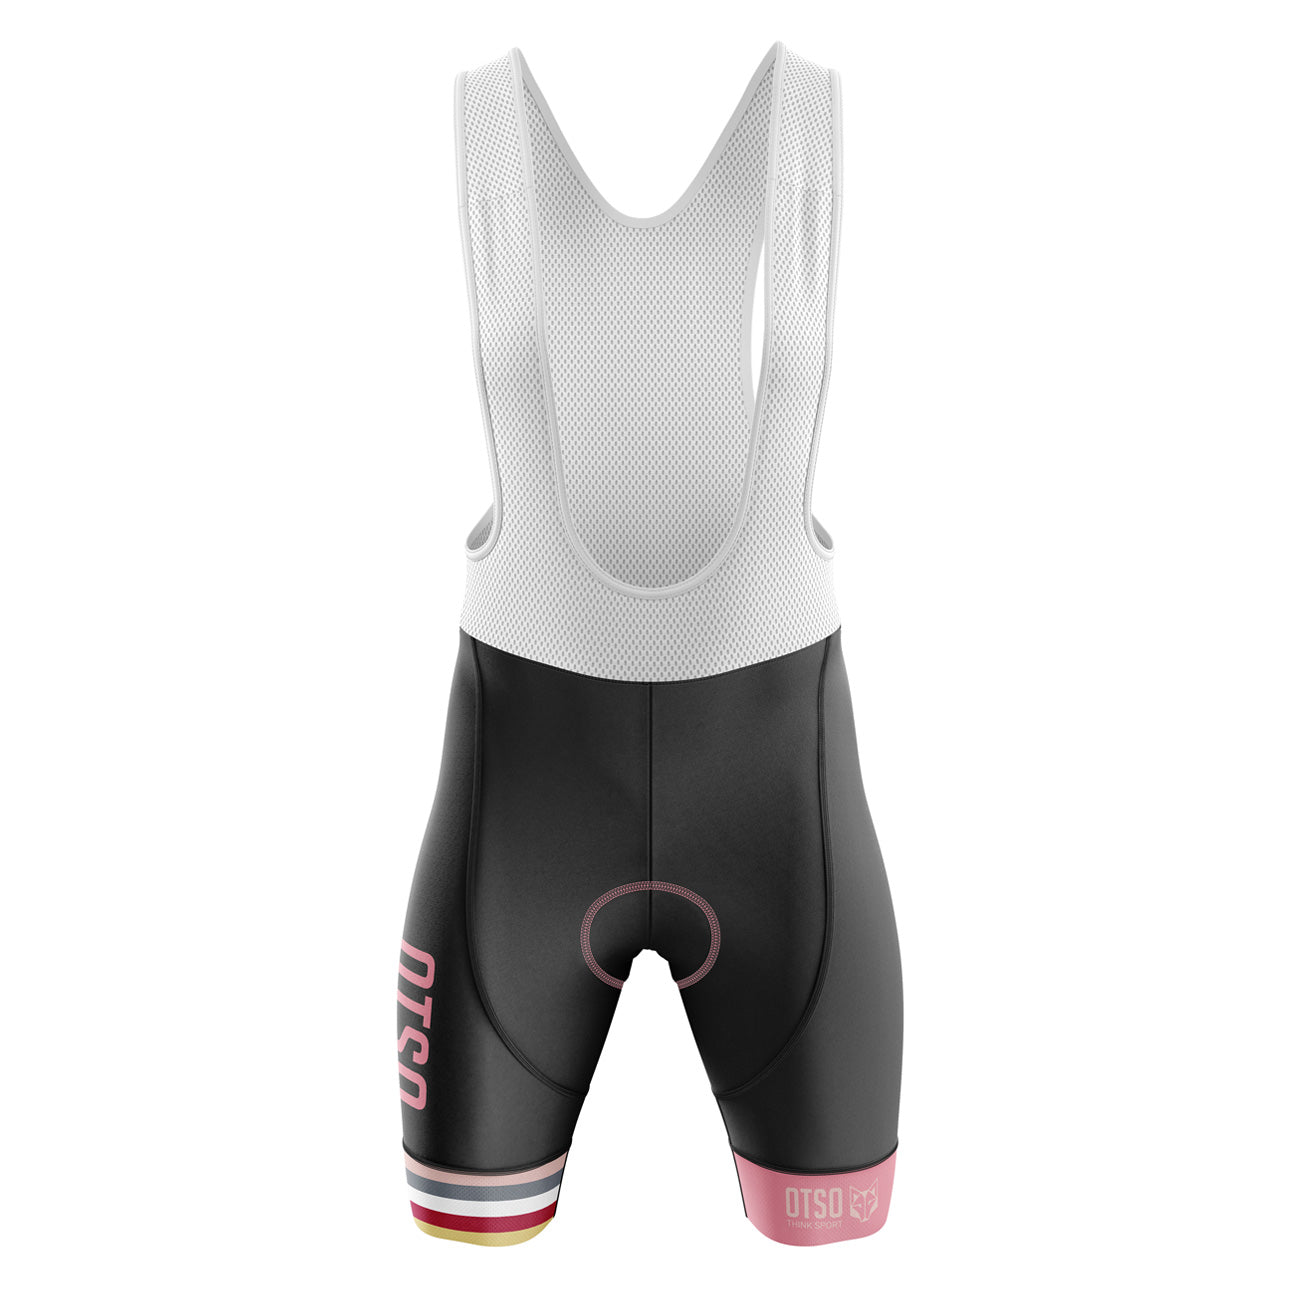 Men's Cycling Shorts Stripes Coral Pink (Outlet)